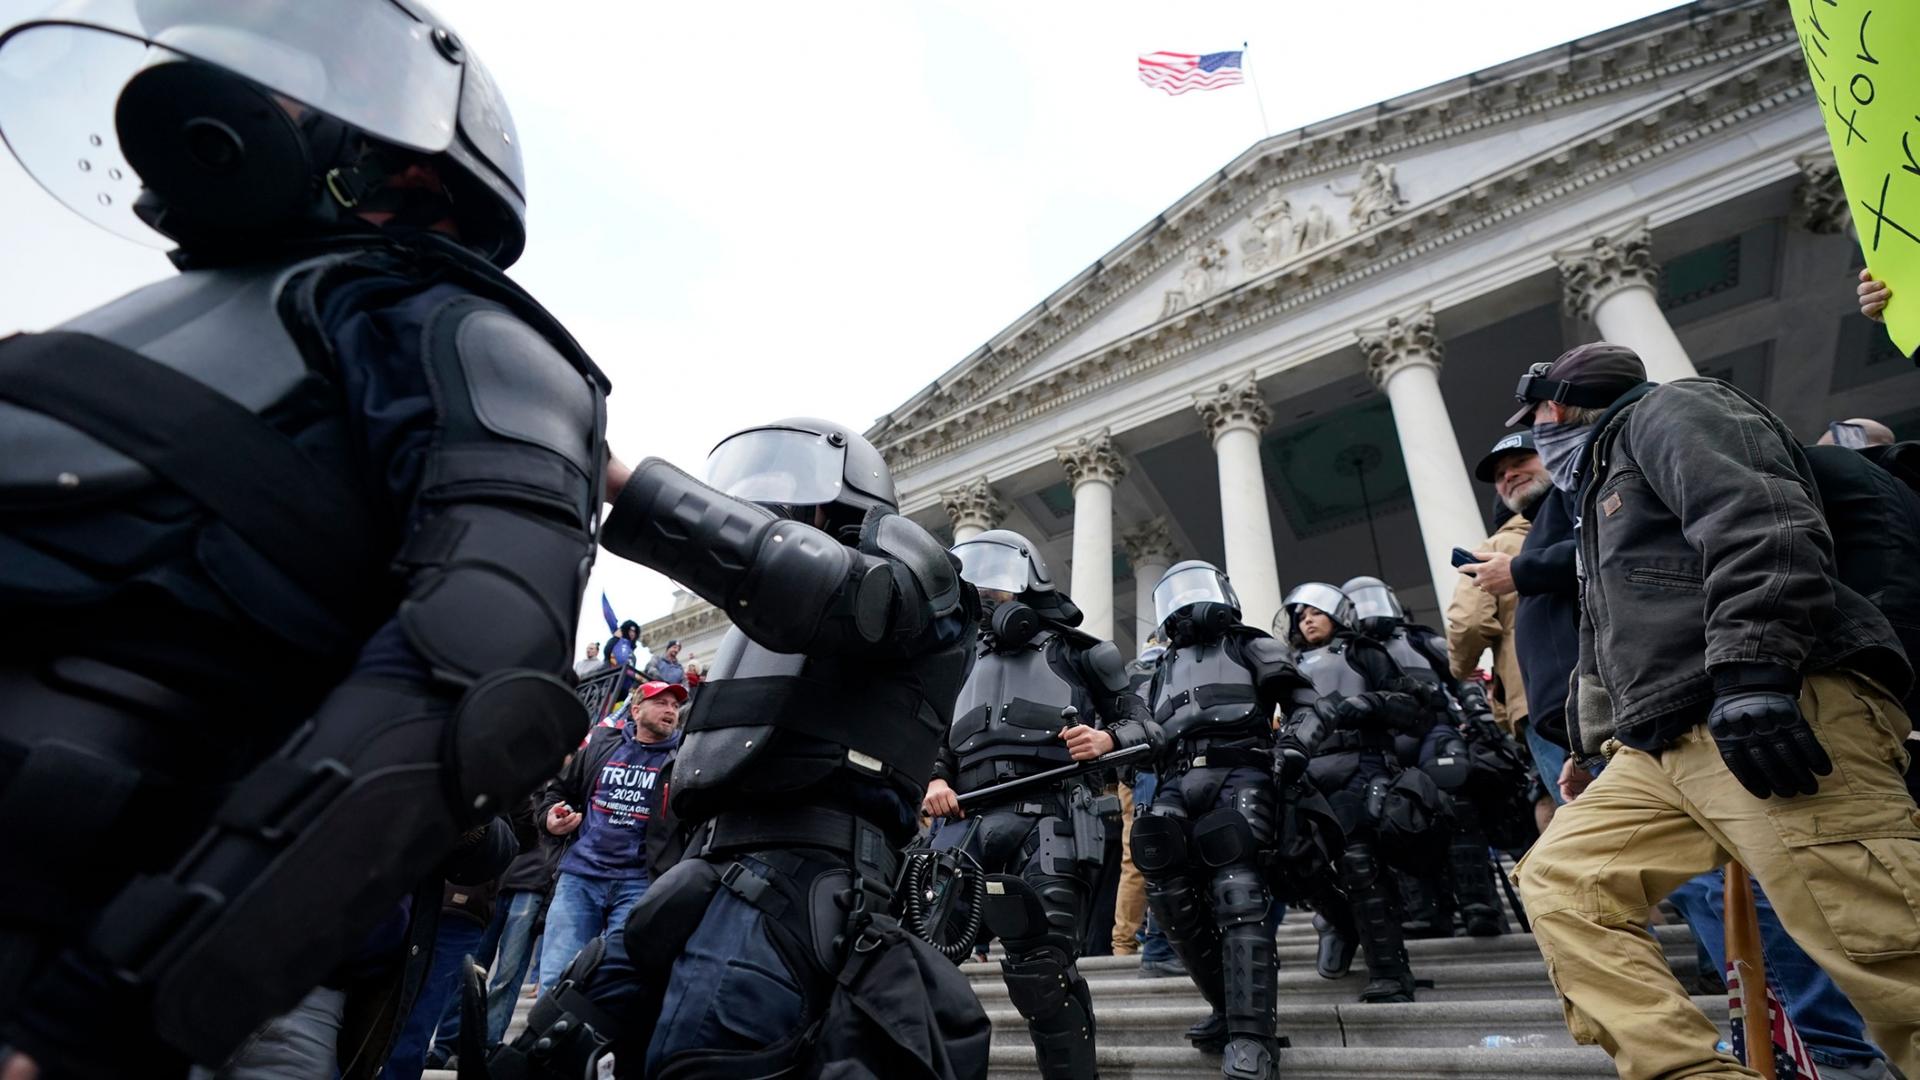 A line of police are shown walking down the Capitol building staircase dressed in black armor with helmets.